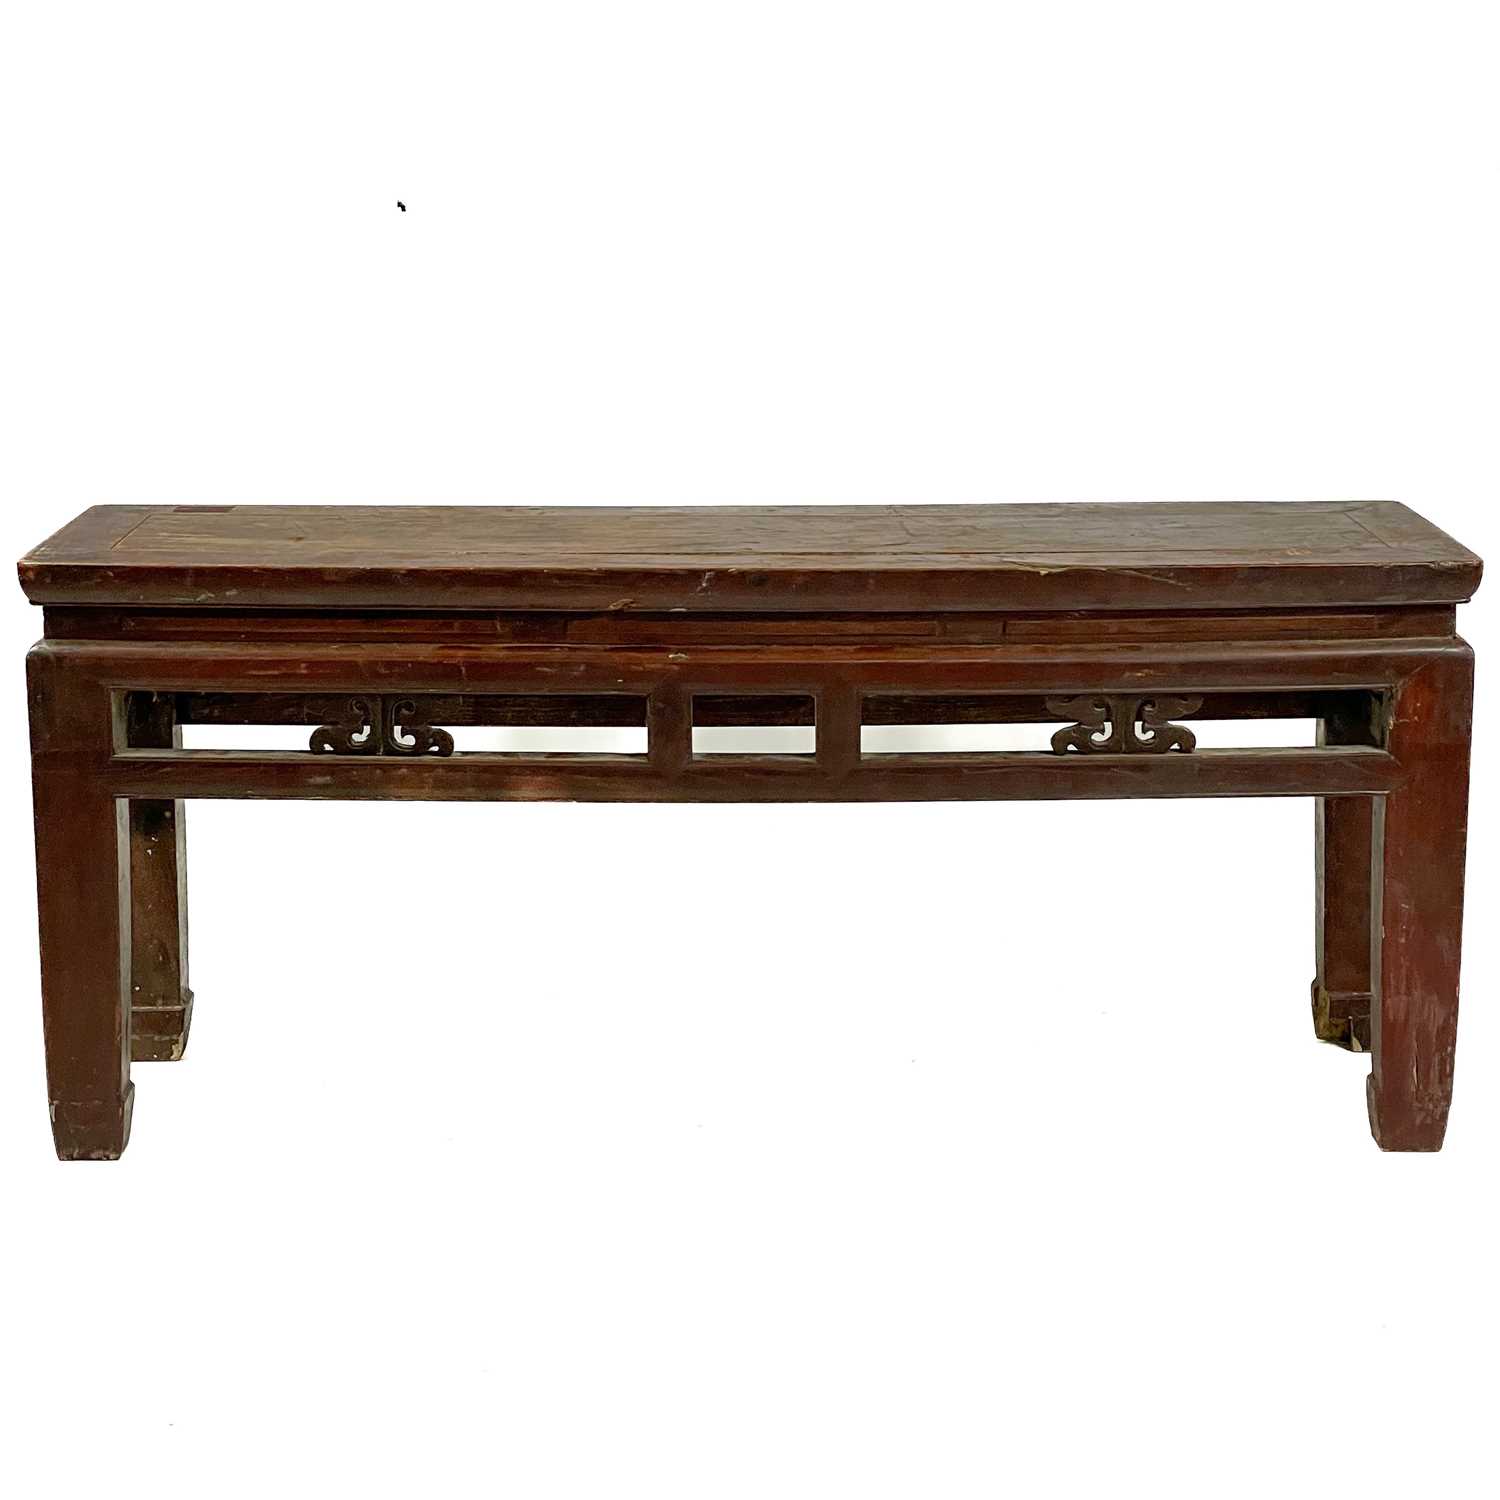 Two similar Chinese hardwood centre tables - Image 2 of 5